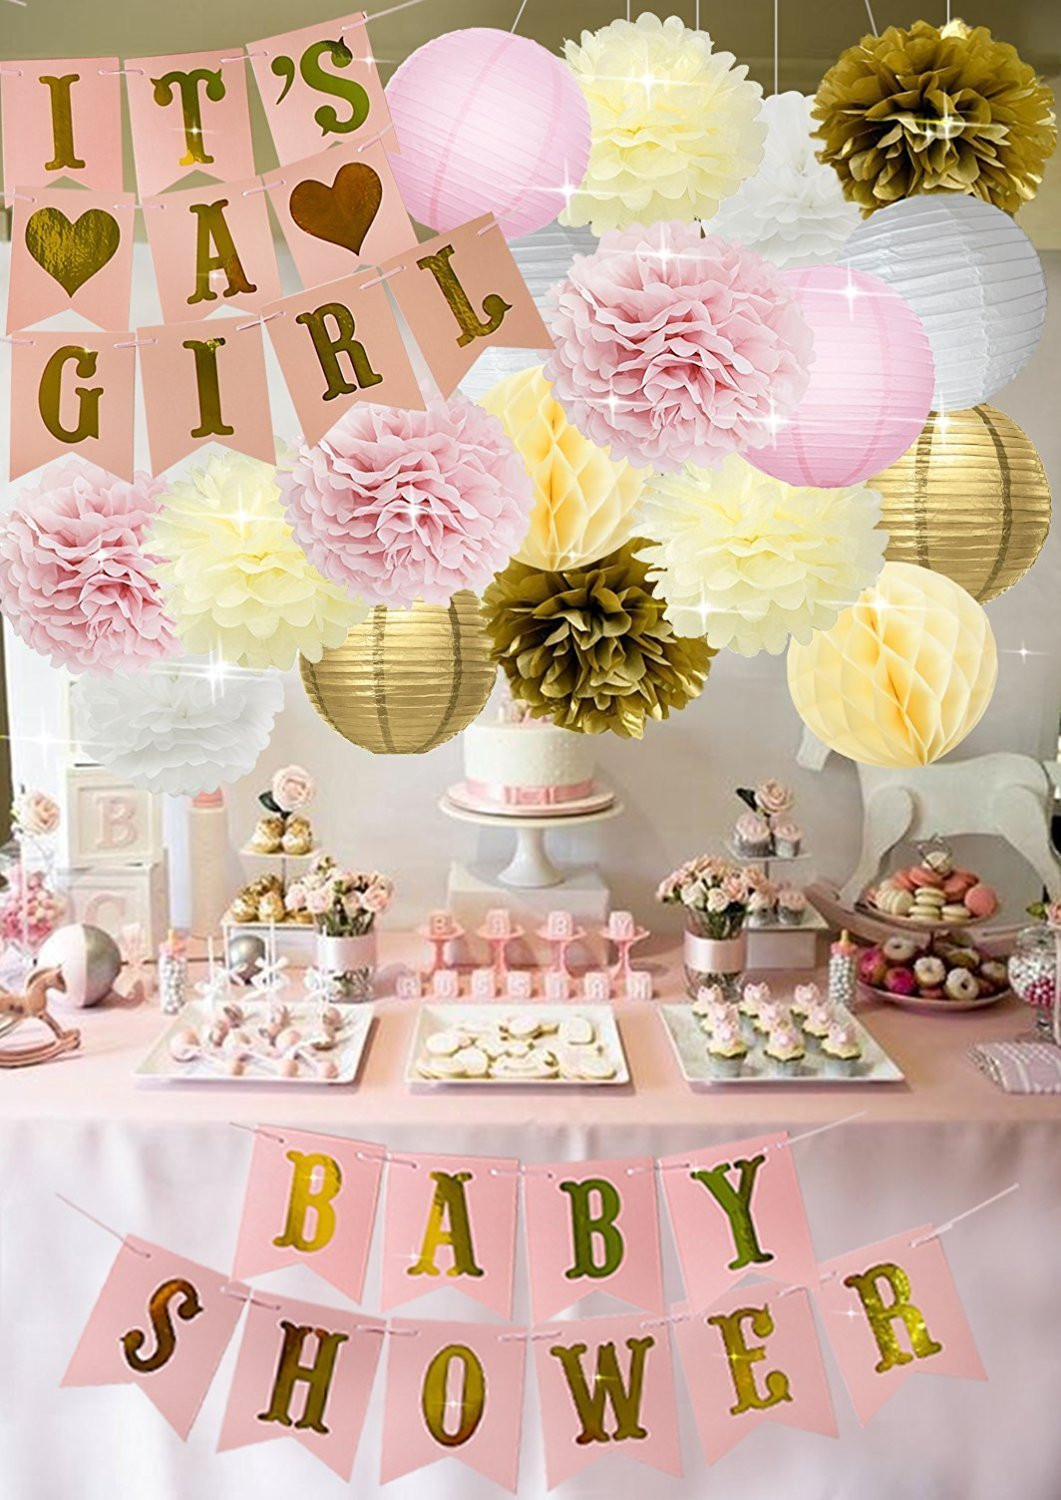 Baby Shower Decorating Ideas For A Girl
 Baby Shower Decorations BABY SHOWER IT S A GIRL Garland